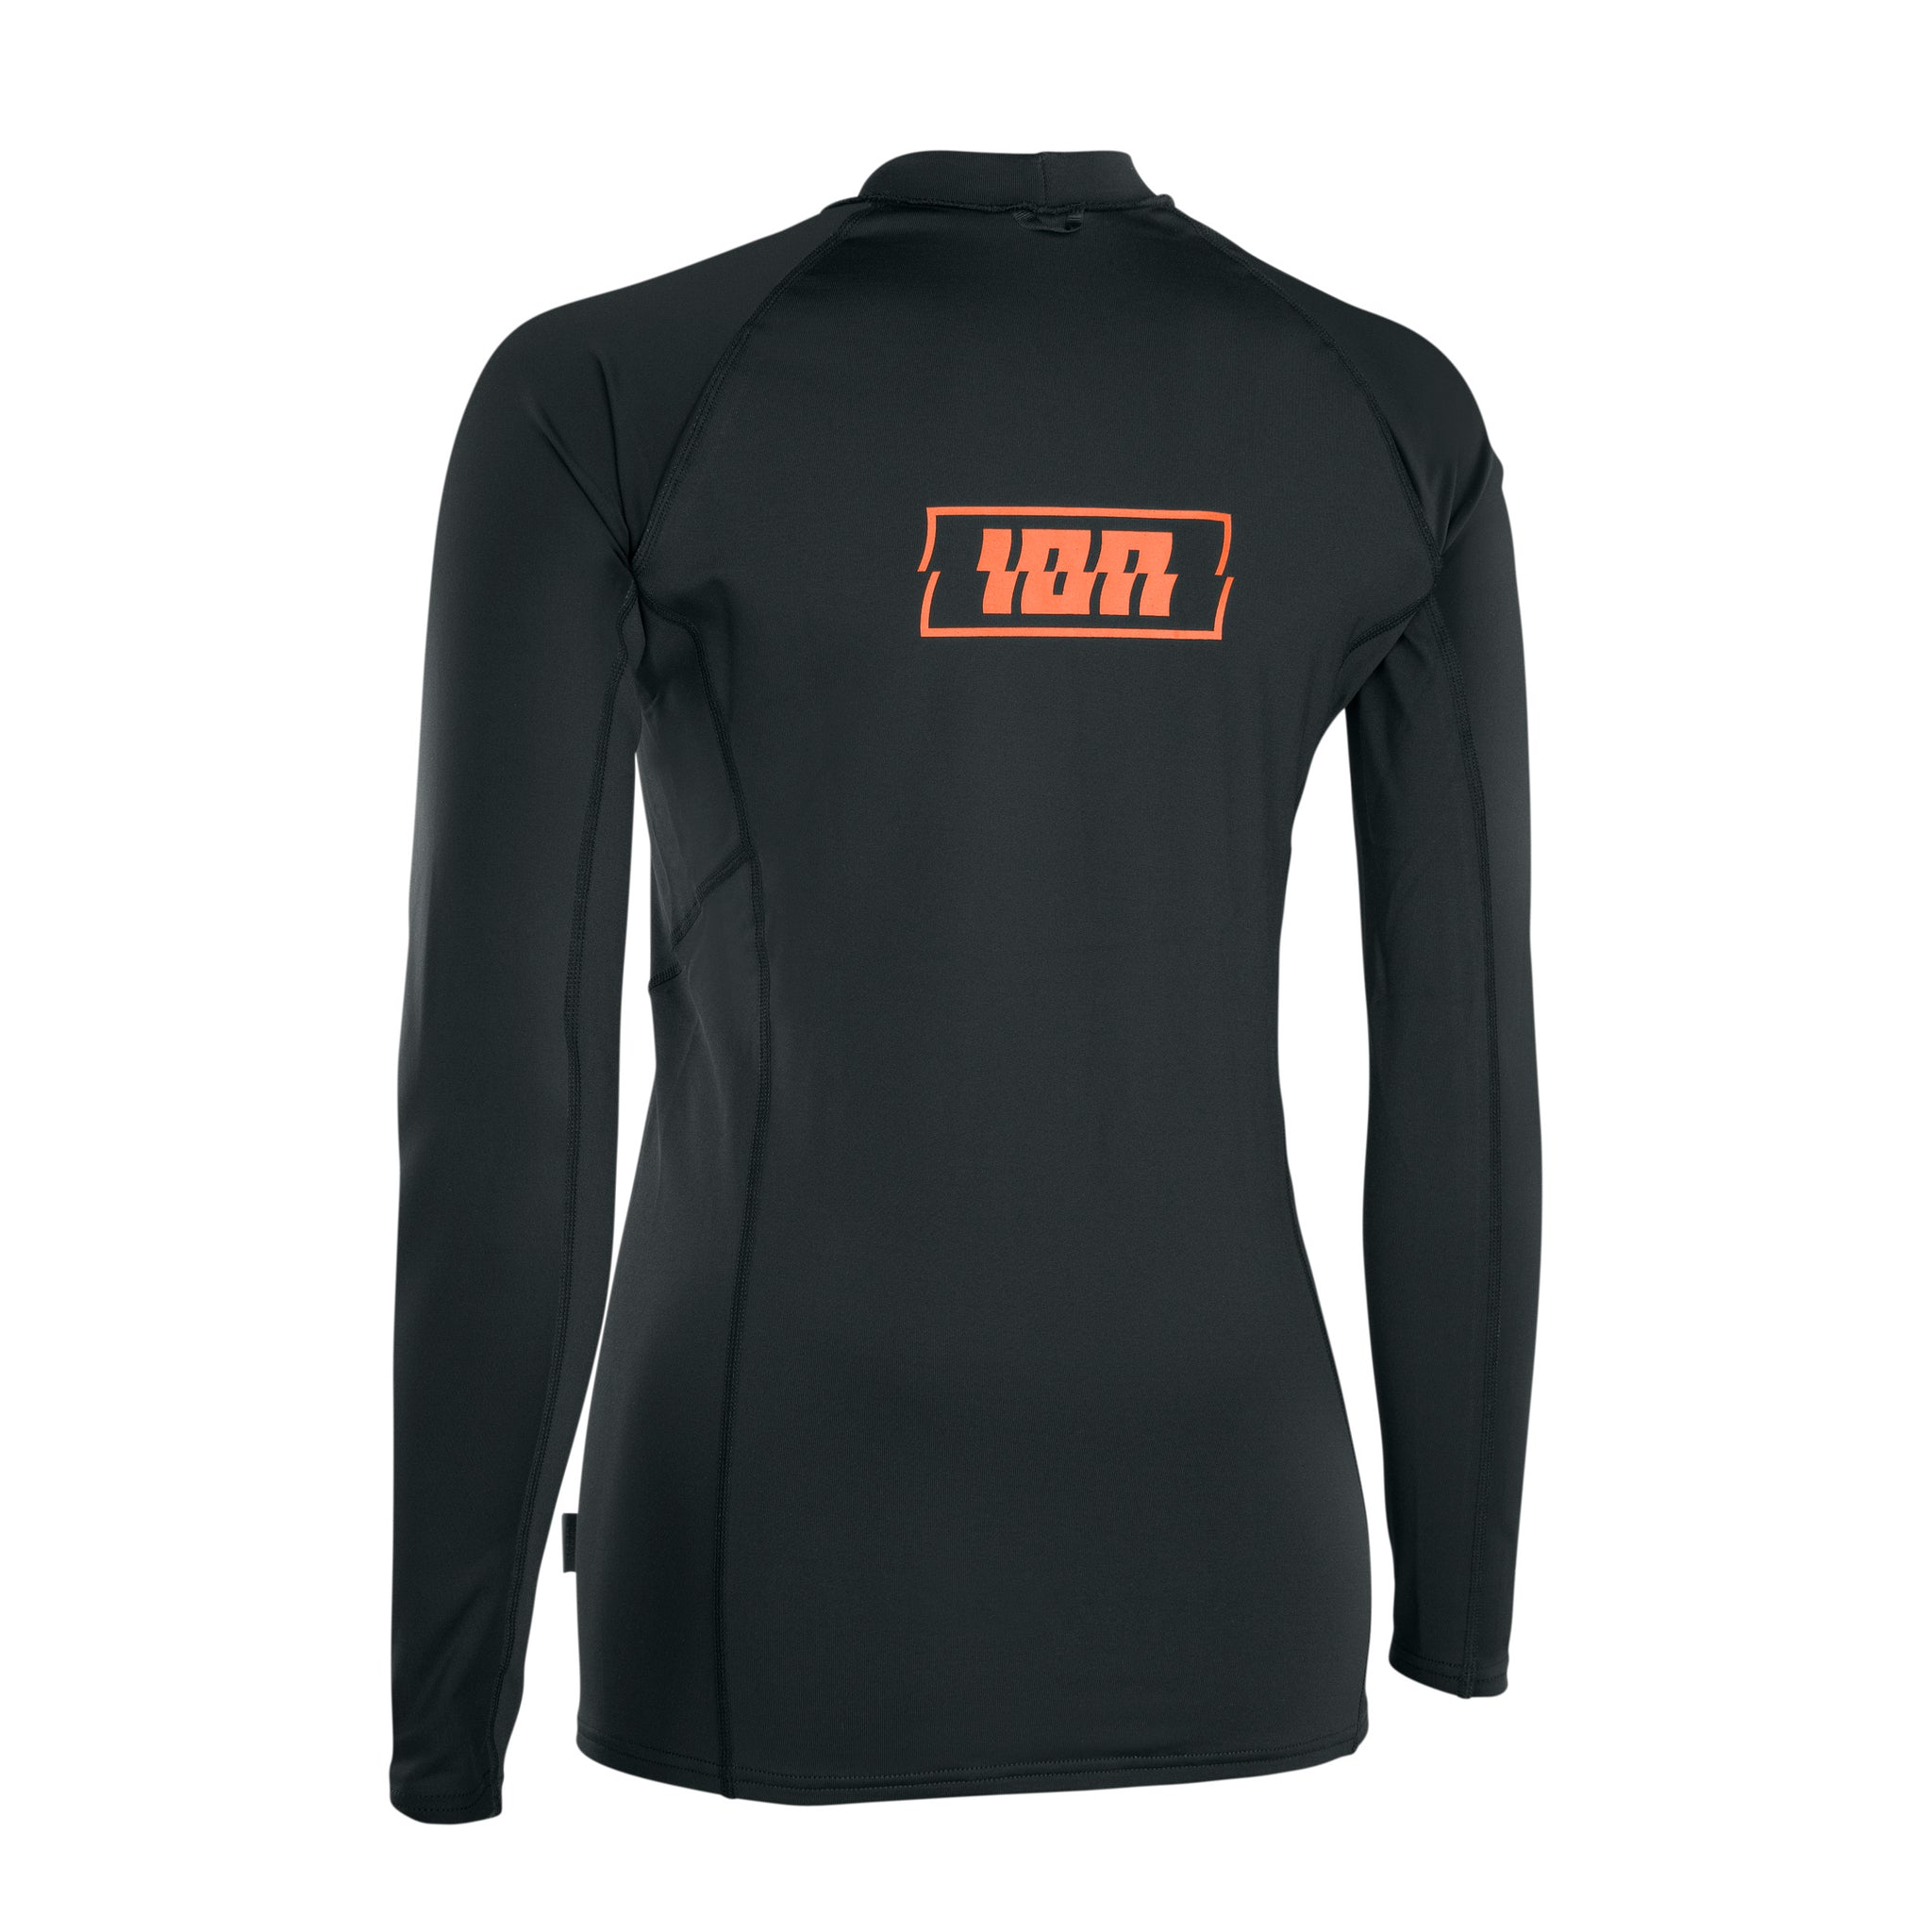 ION Thermo Top LS women